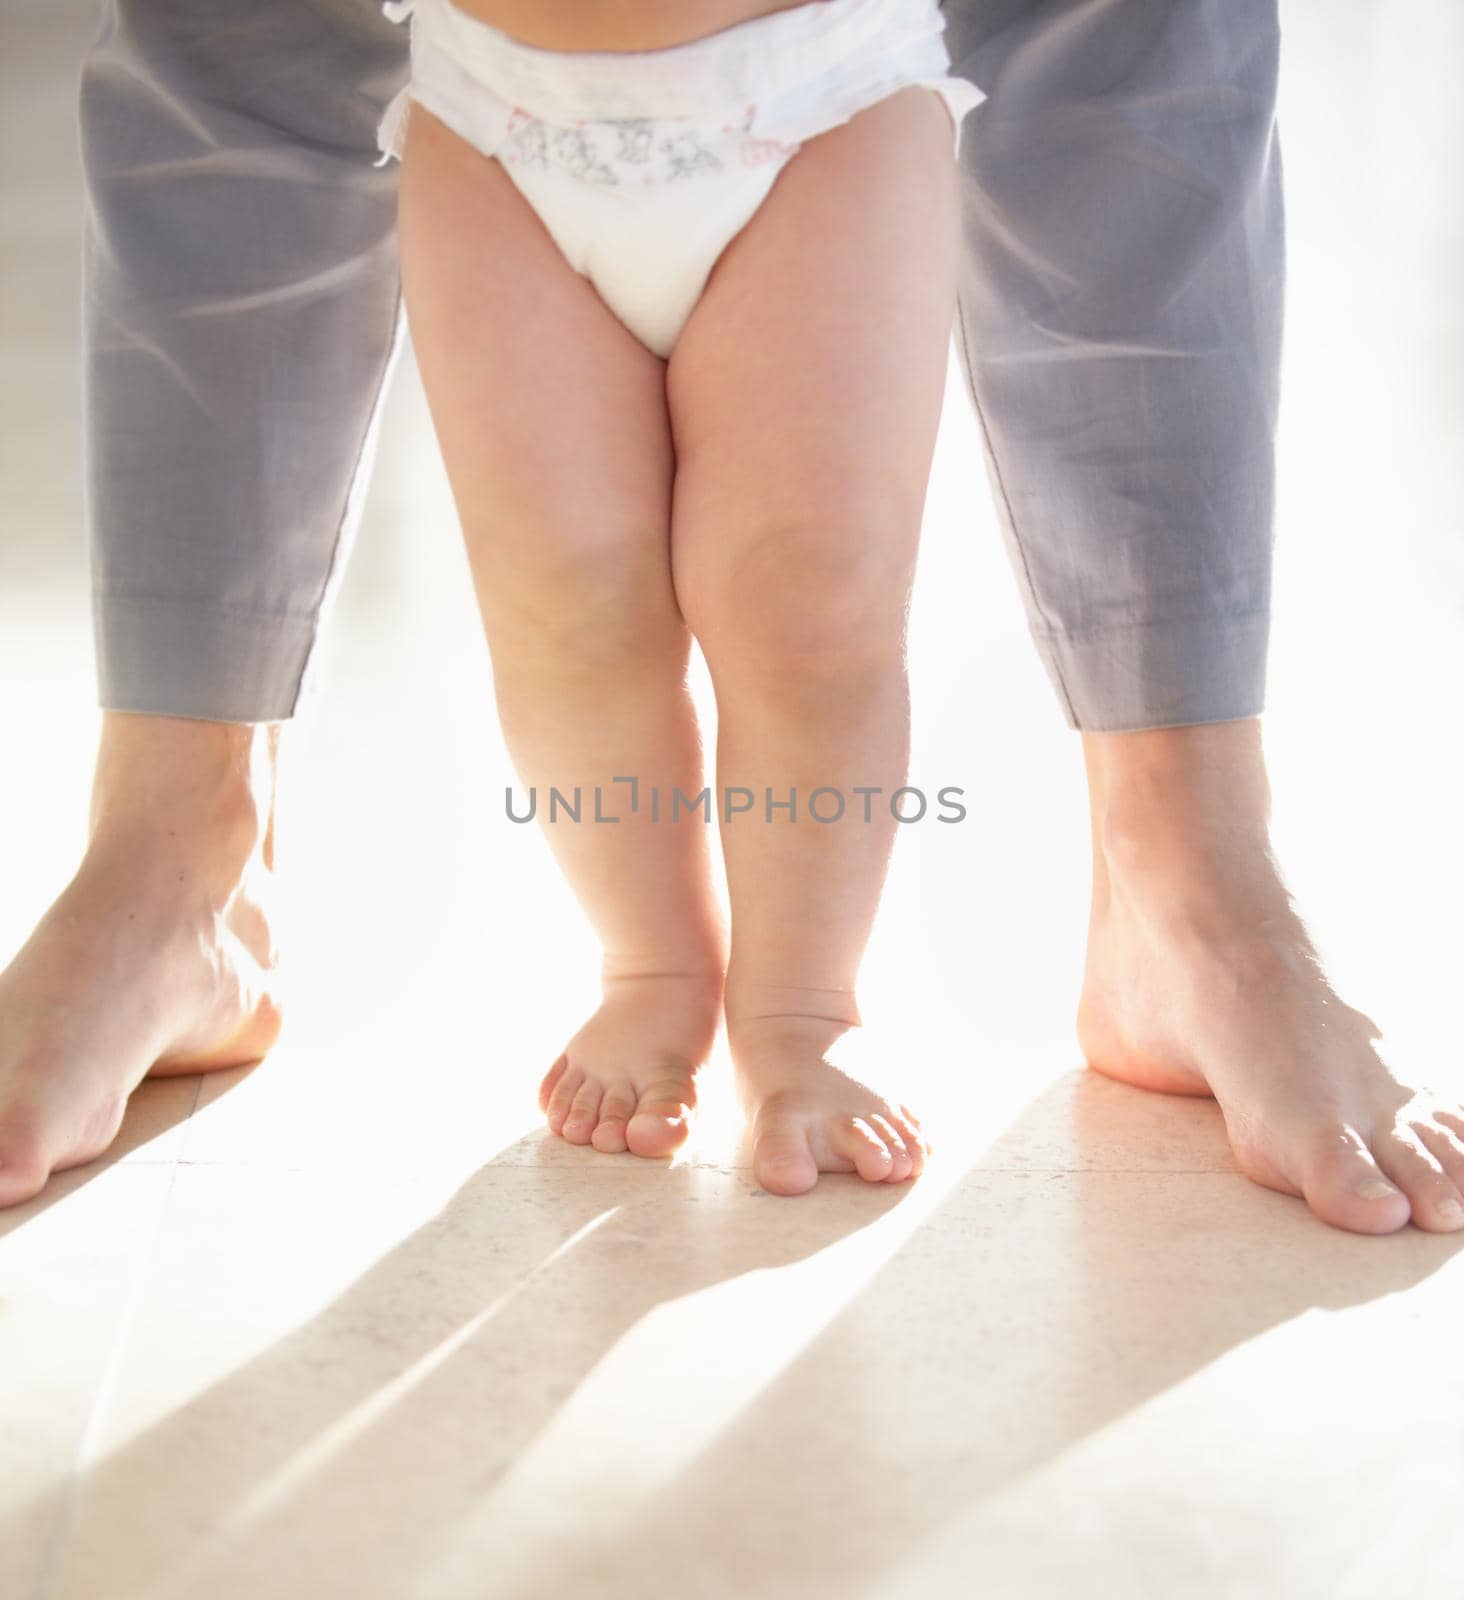 Cropped image of the legs of a baby walking with a parent supporting from behind.